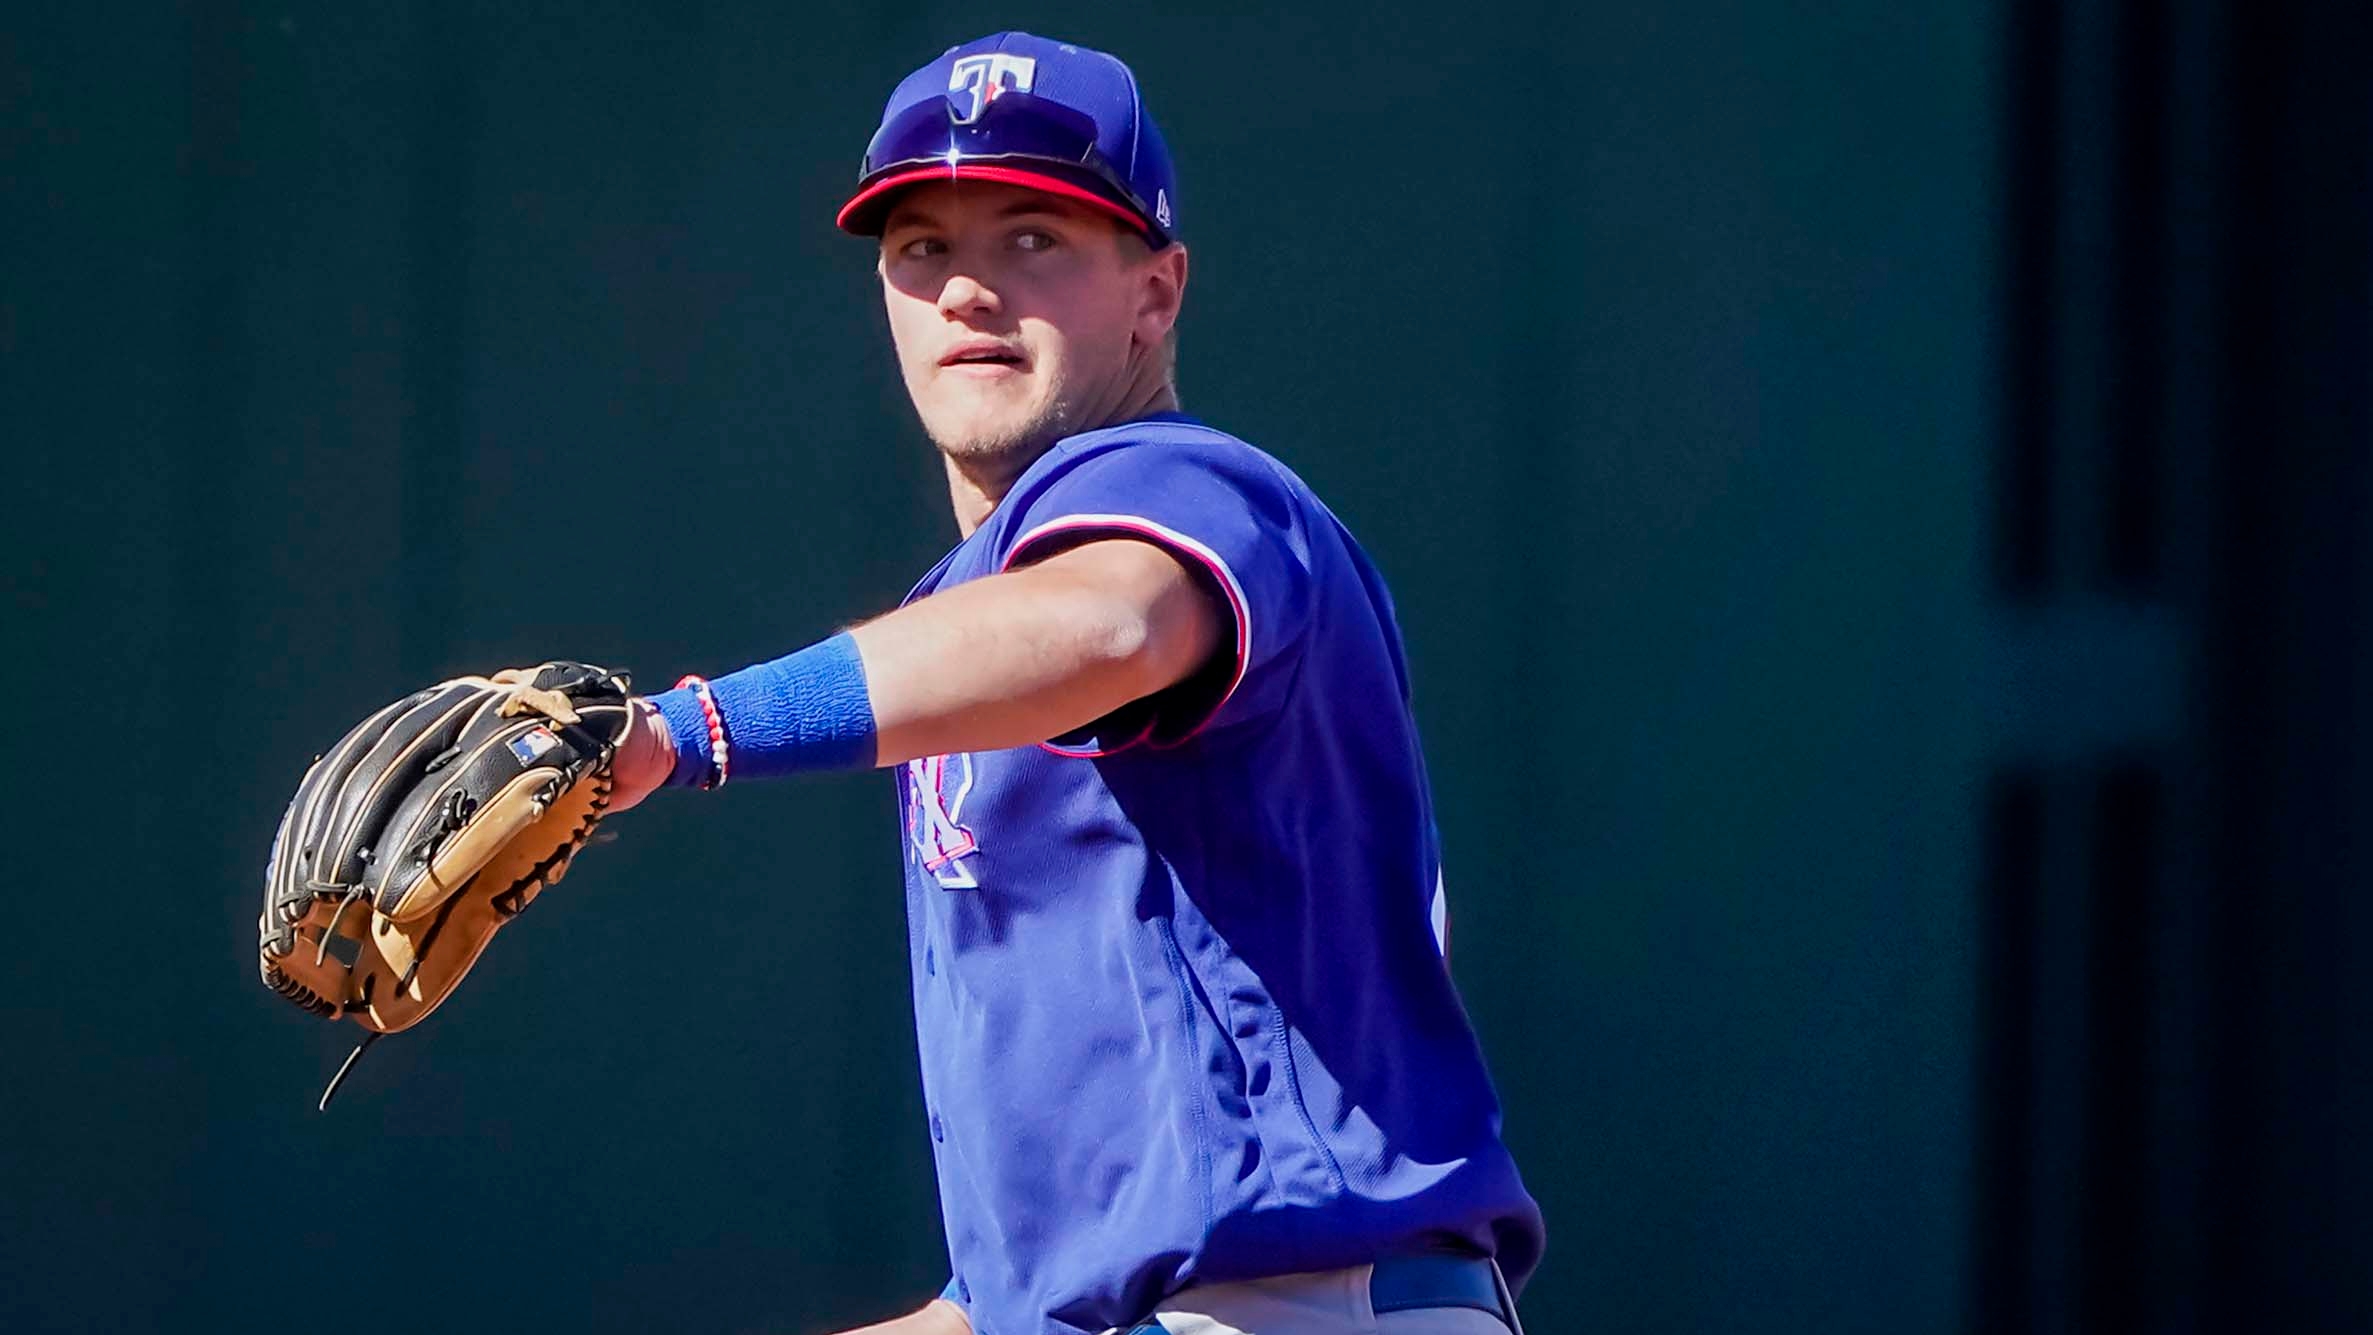 Rangers' top prospect Josh Jung headed to Double-A